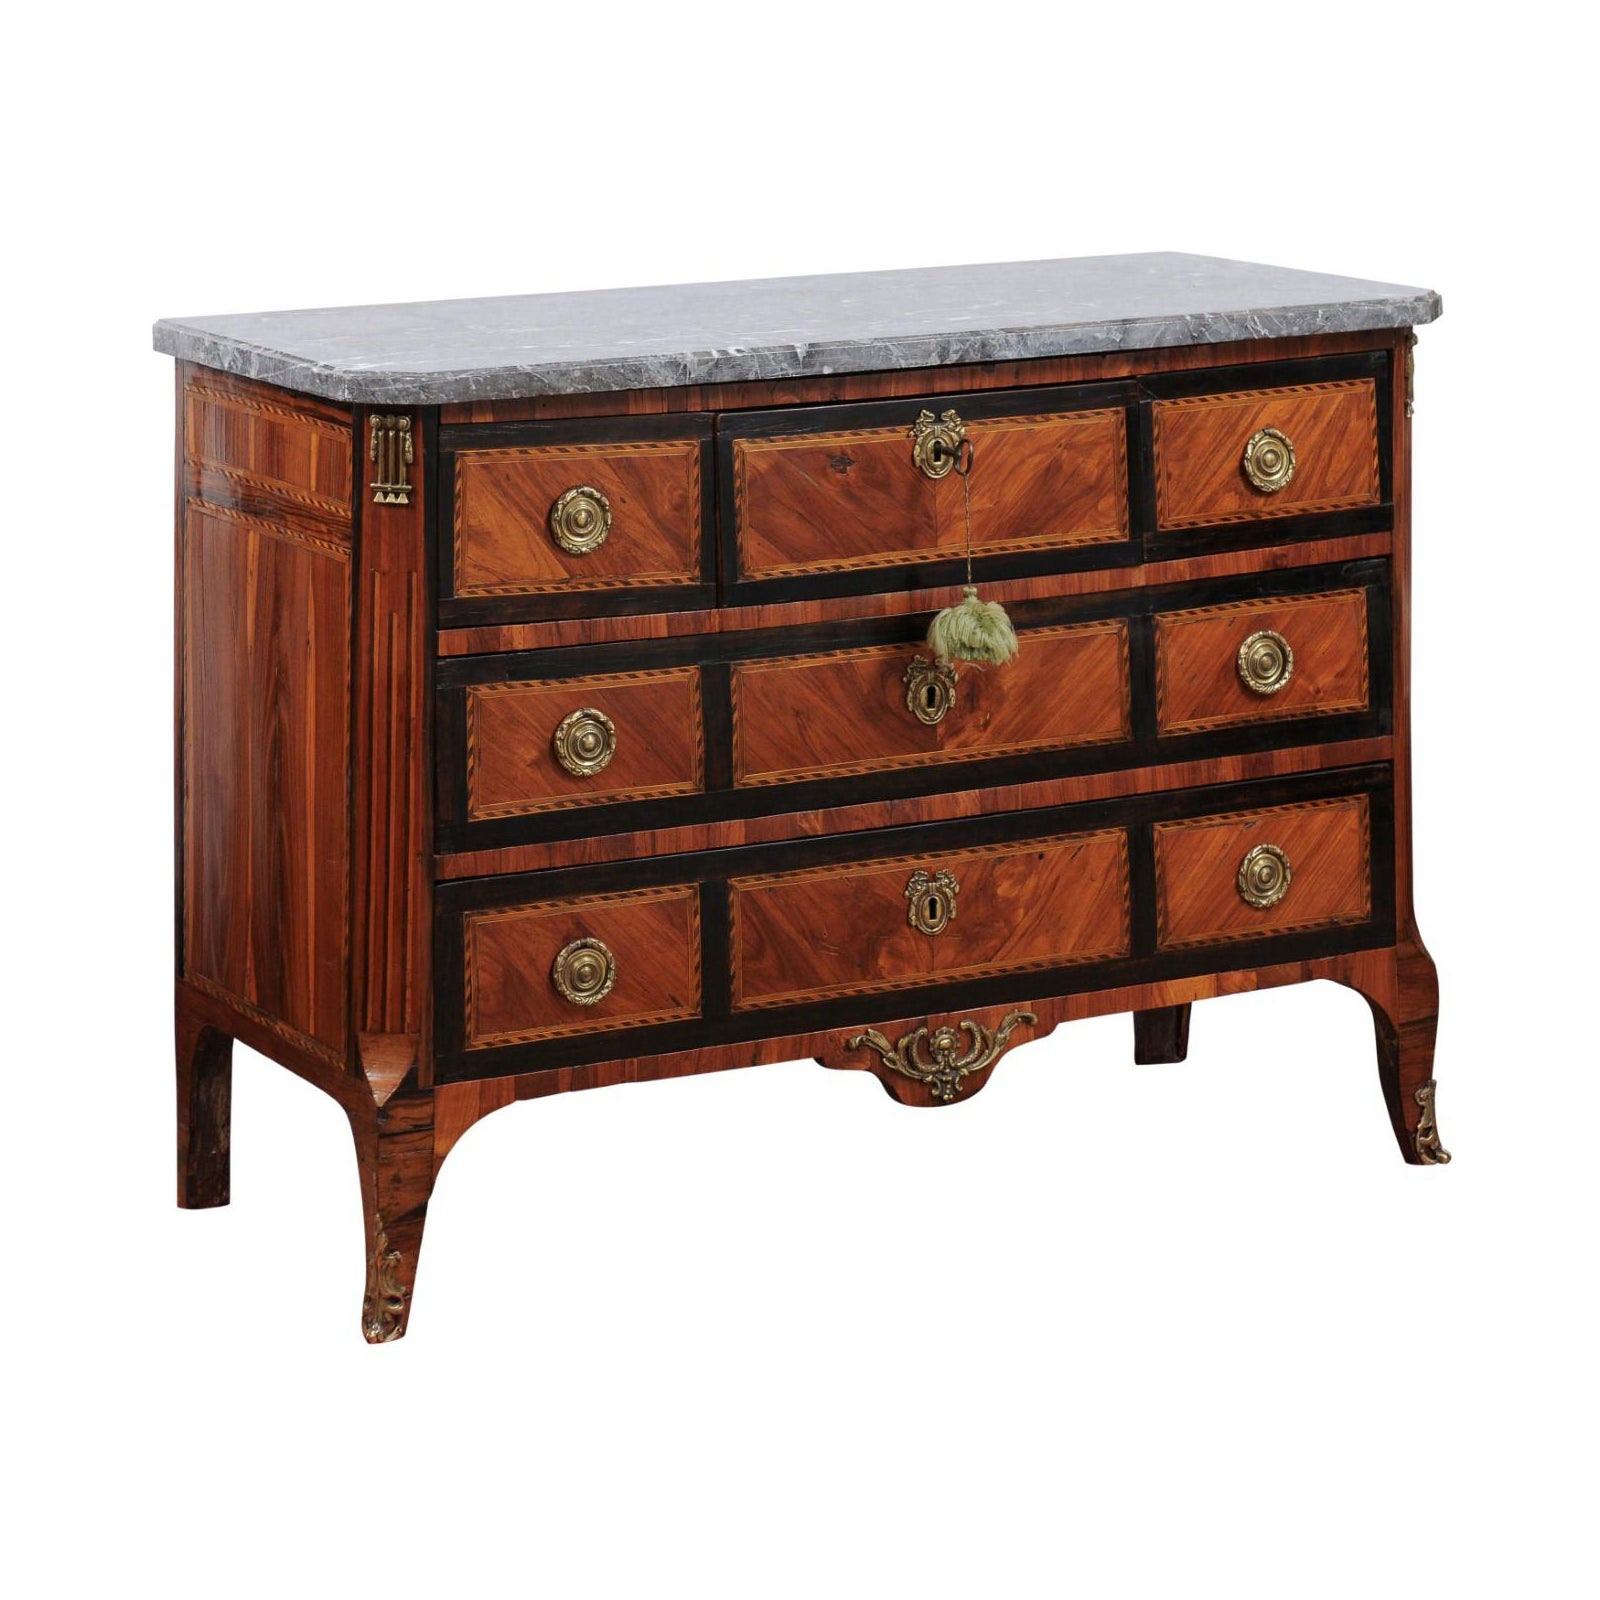 18th Century Continental Inlaid Commode For Sale